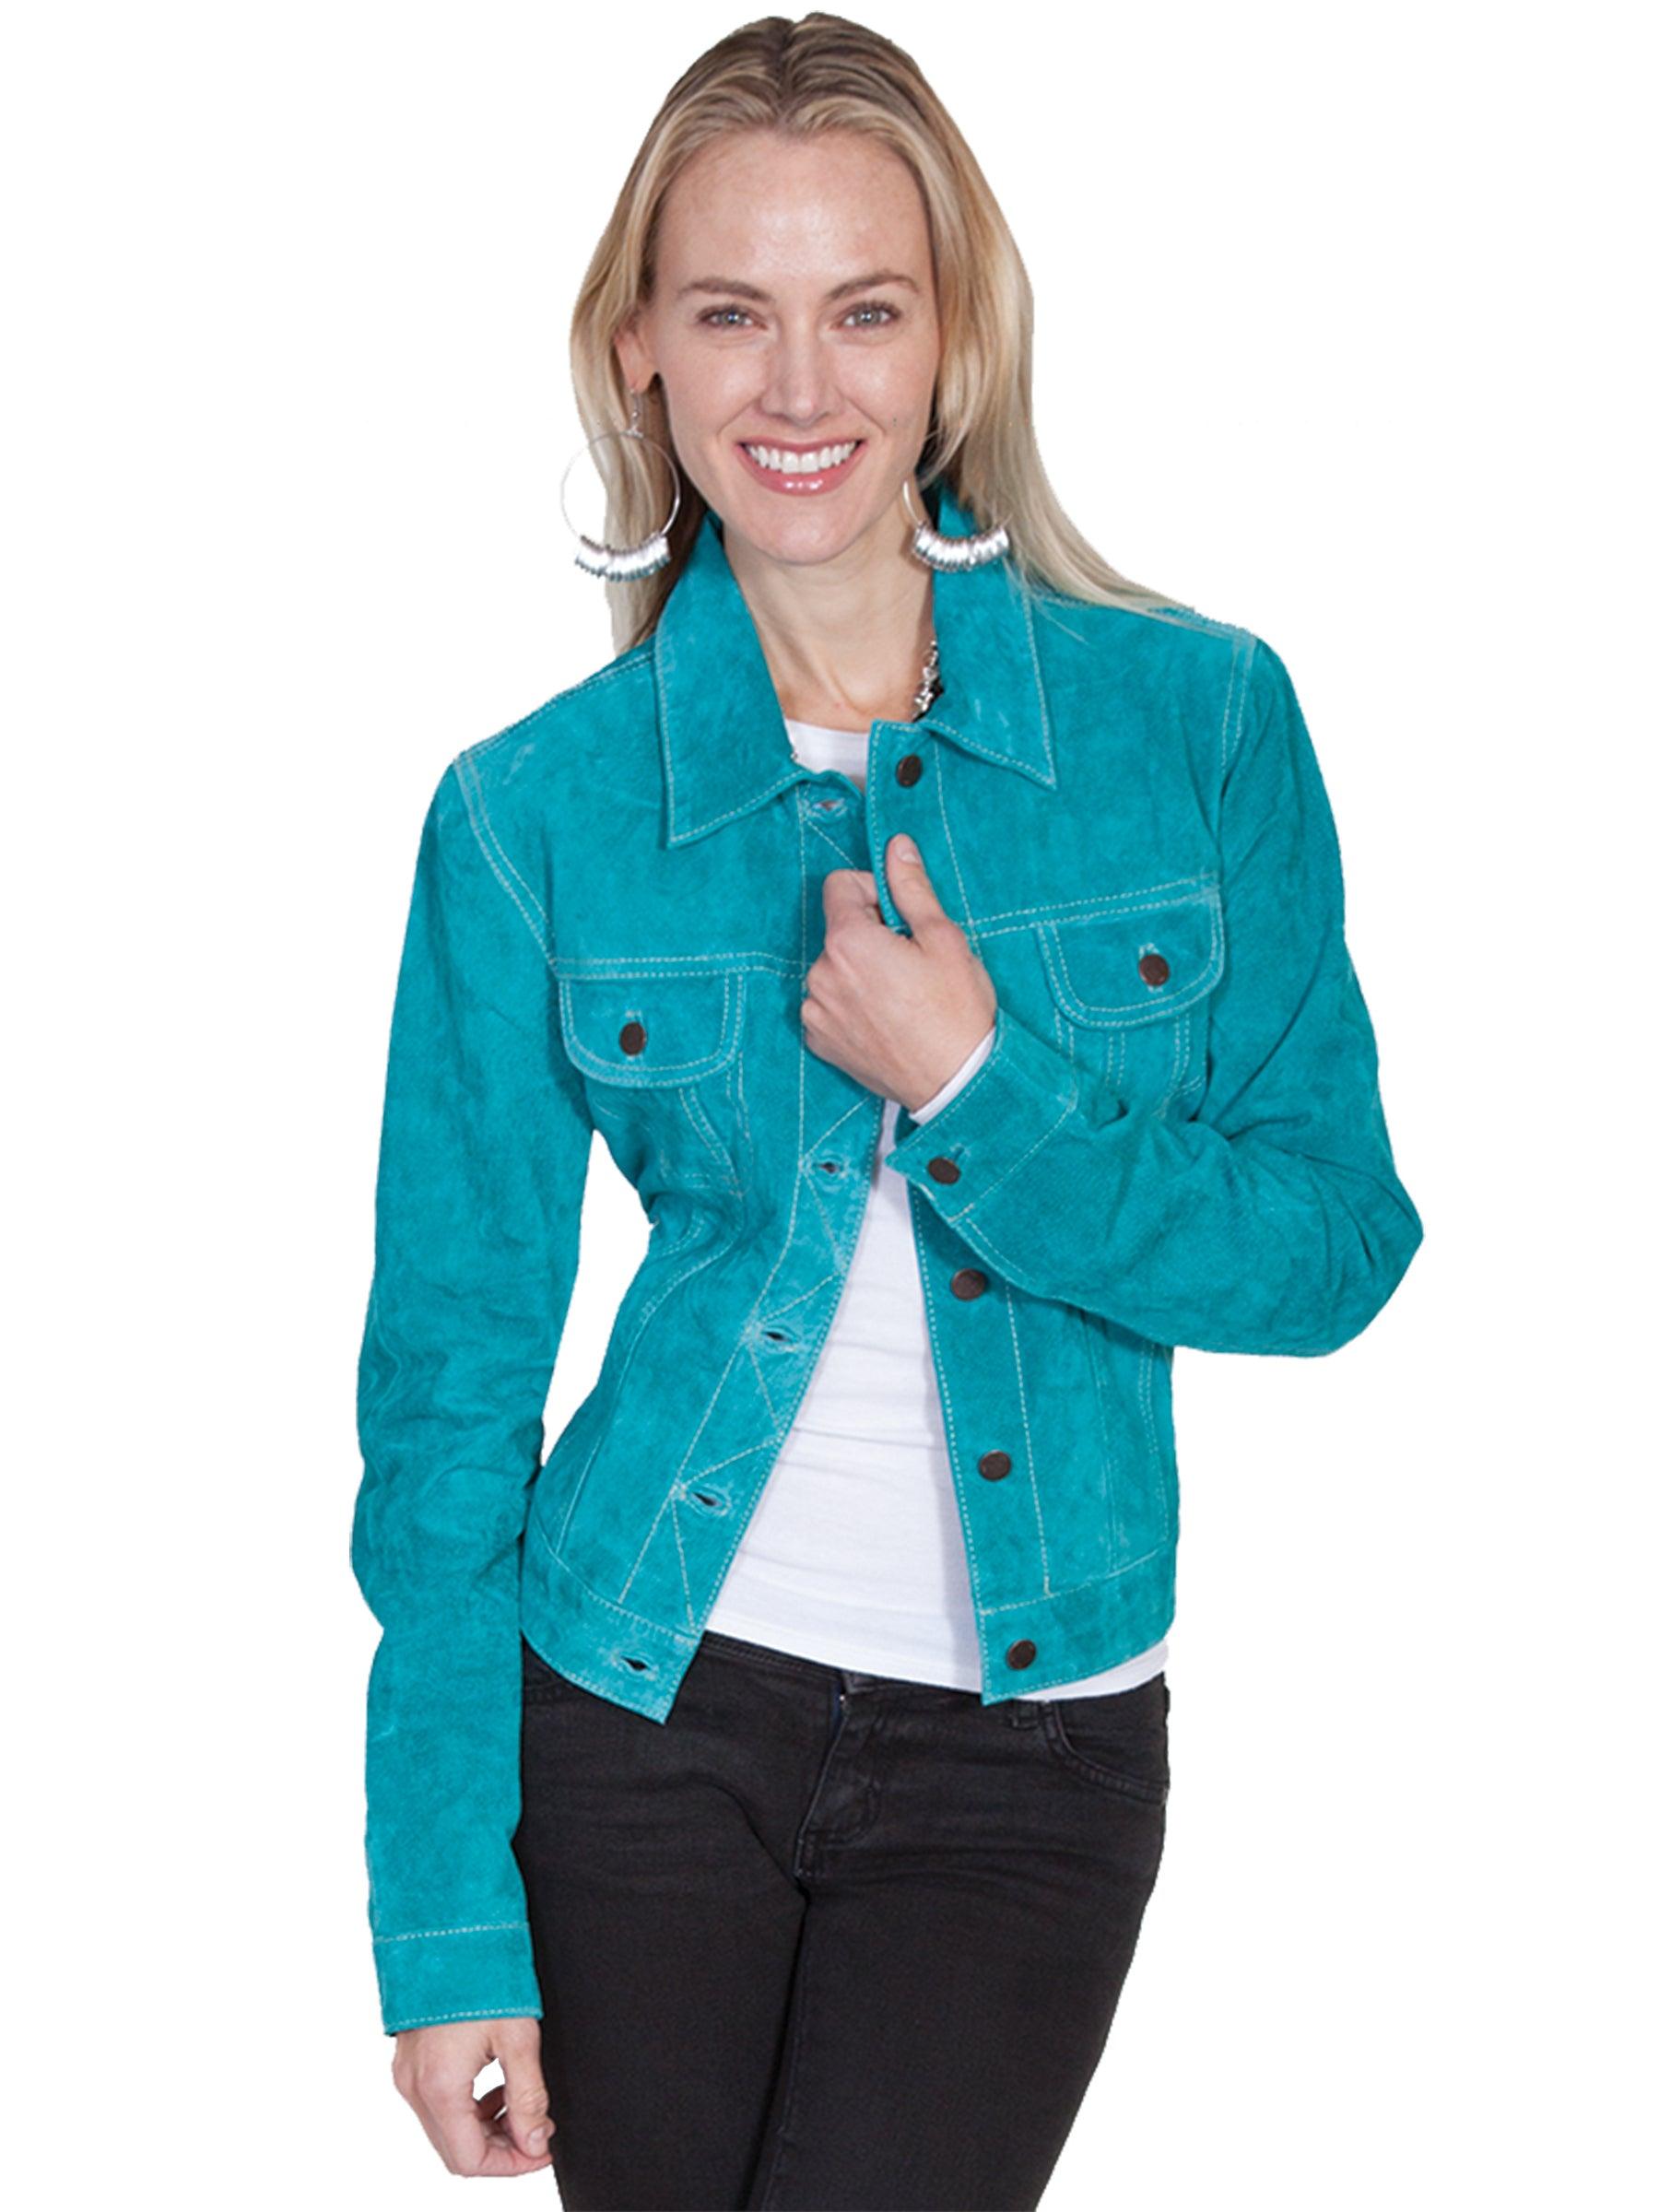 Scully TURQUOISE JEAN JACKET - Flyclothing LLC